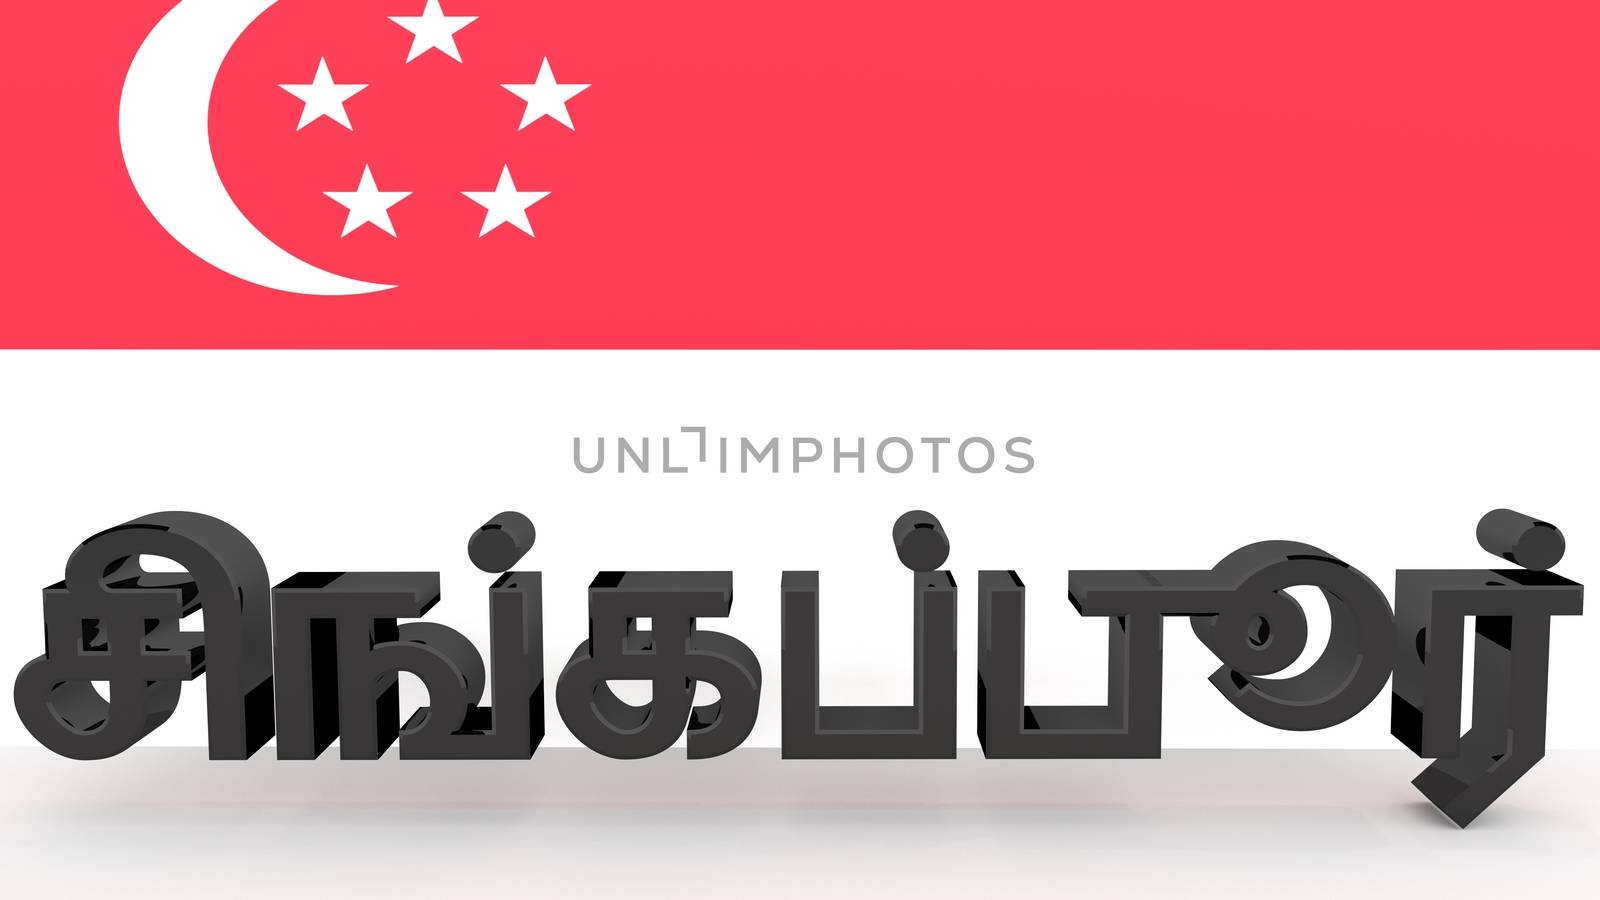 Tamil characters meaning Singapore by MarkDw